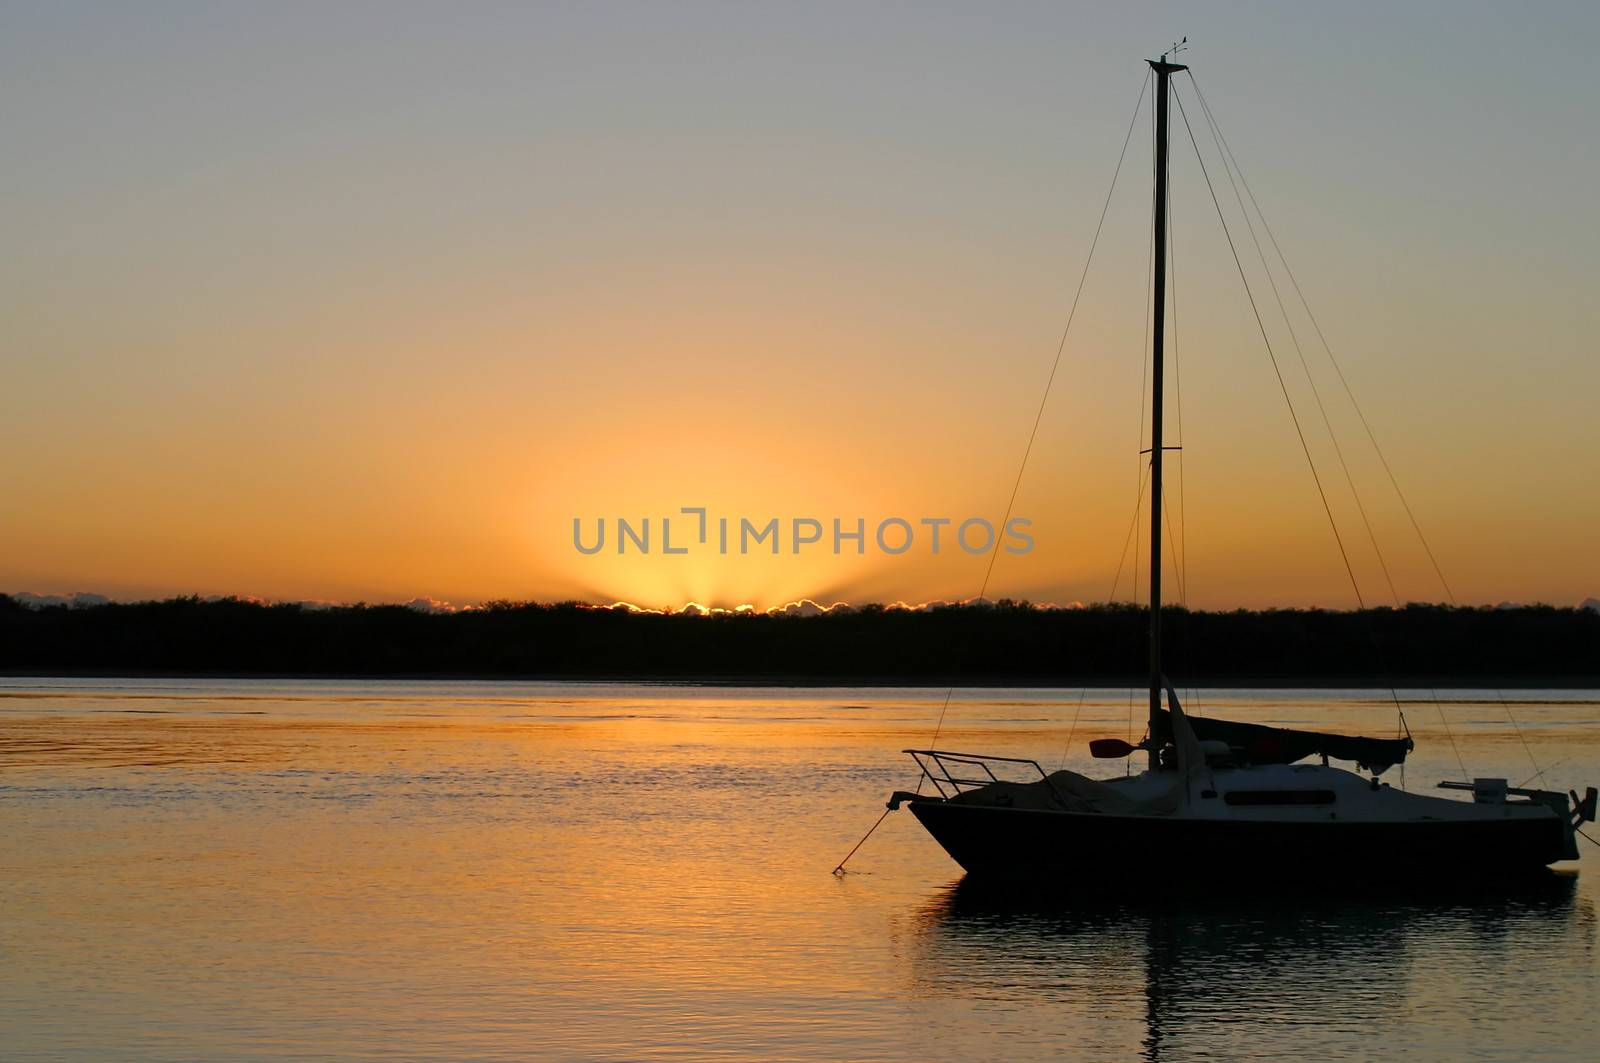 Yacht moored at peace in the early morning dawn light.